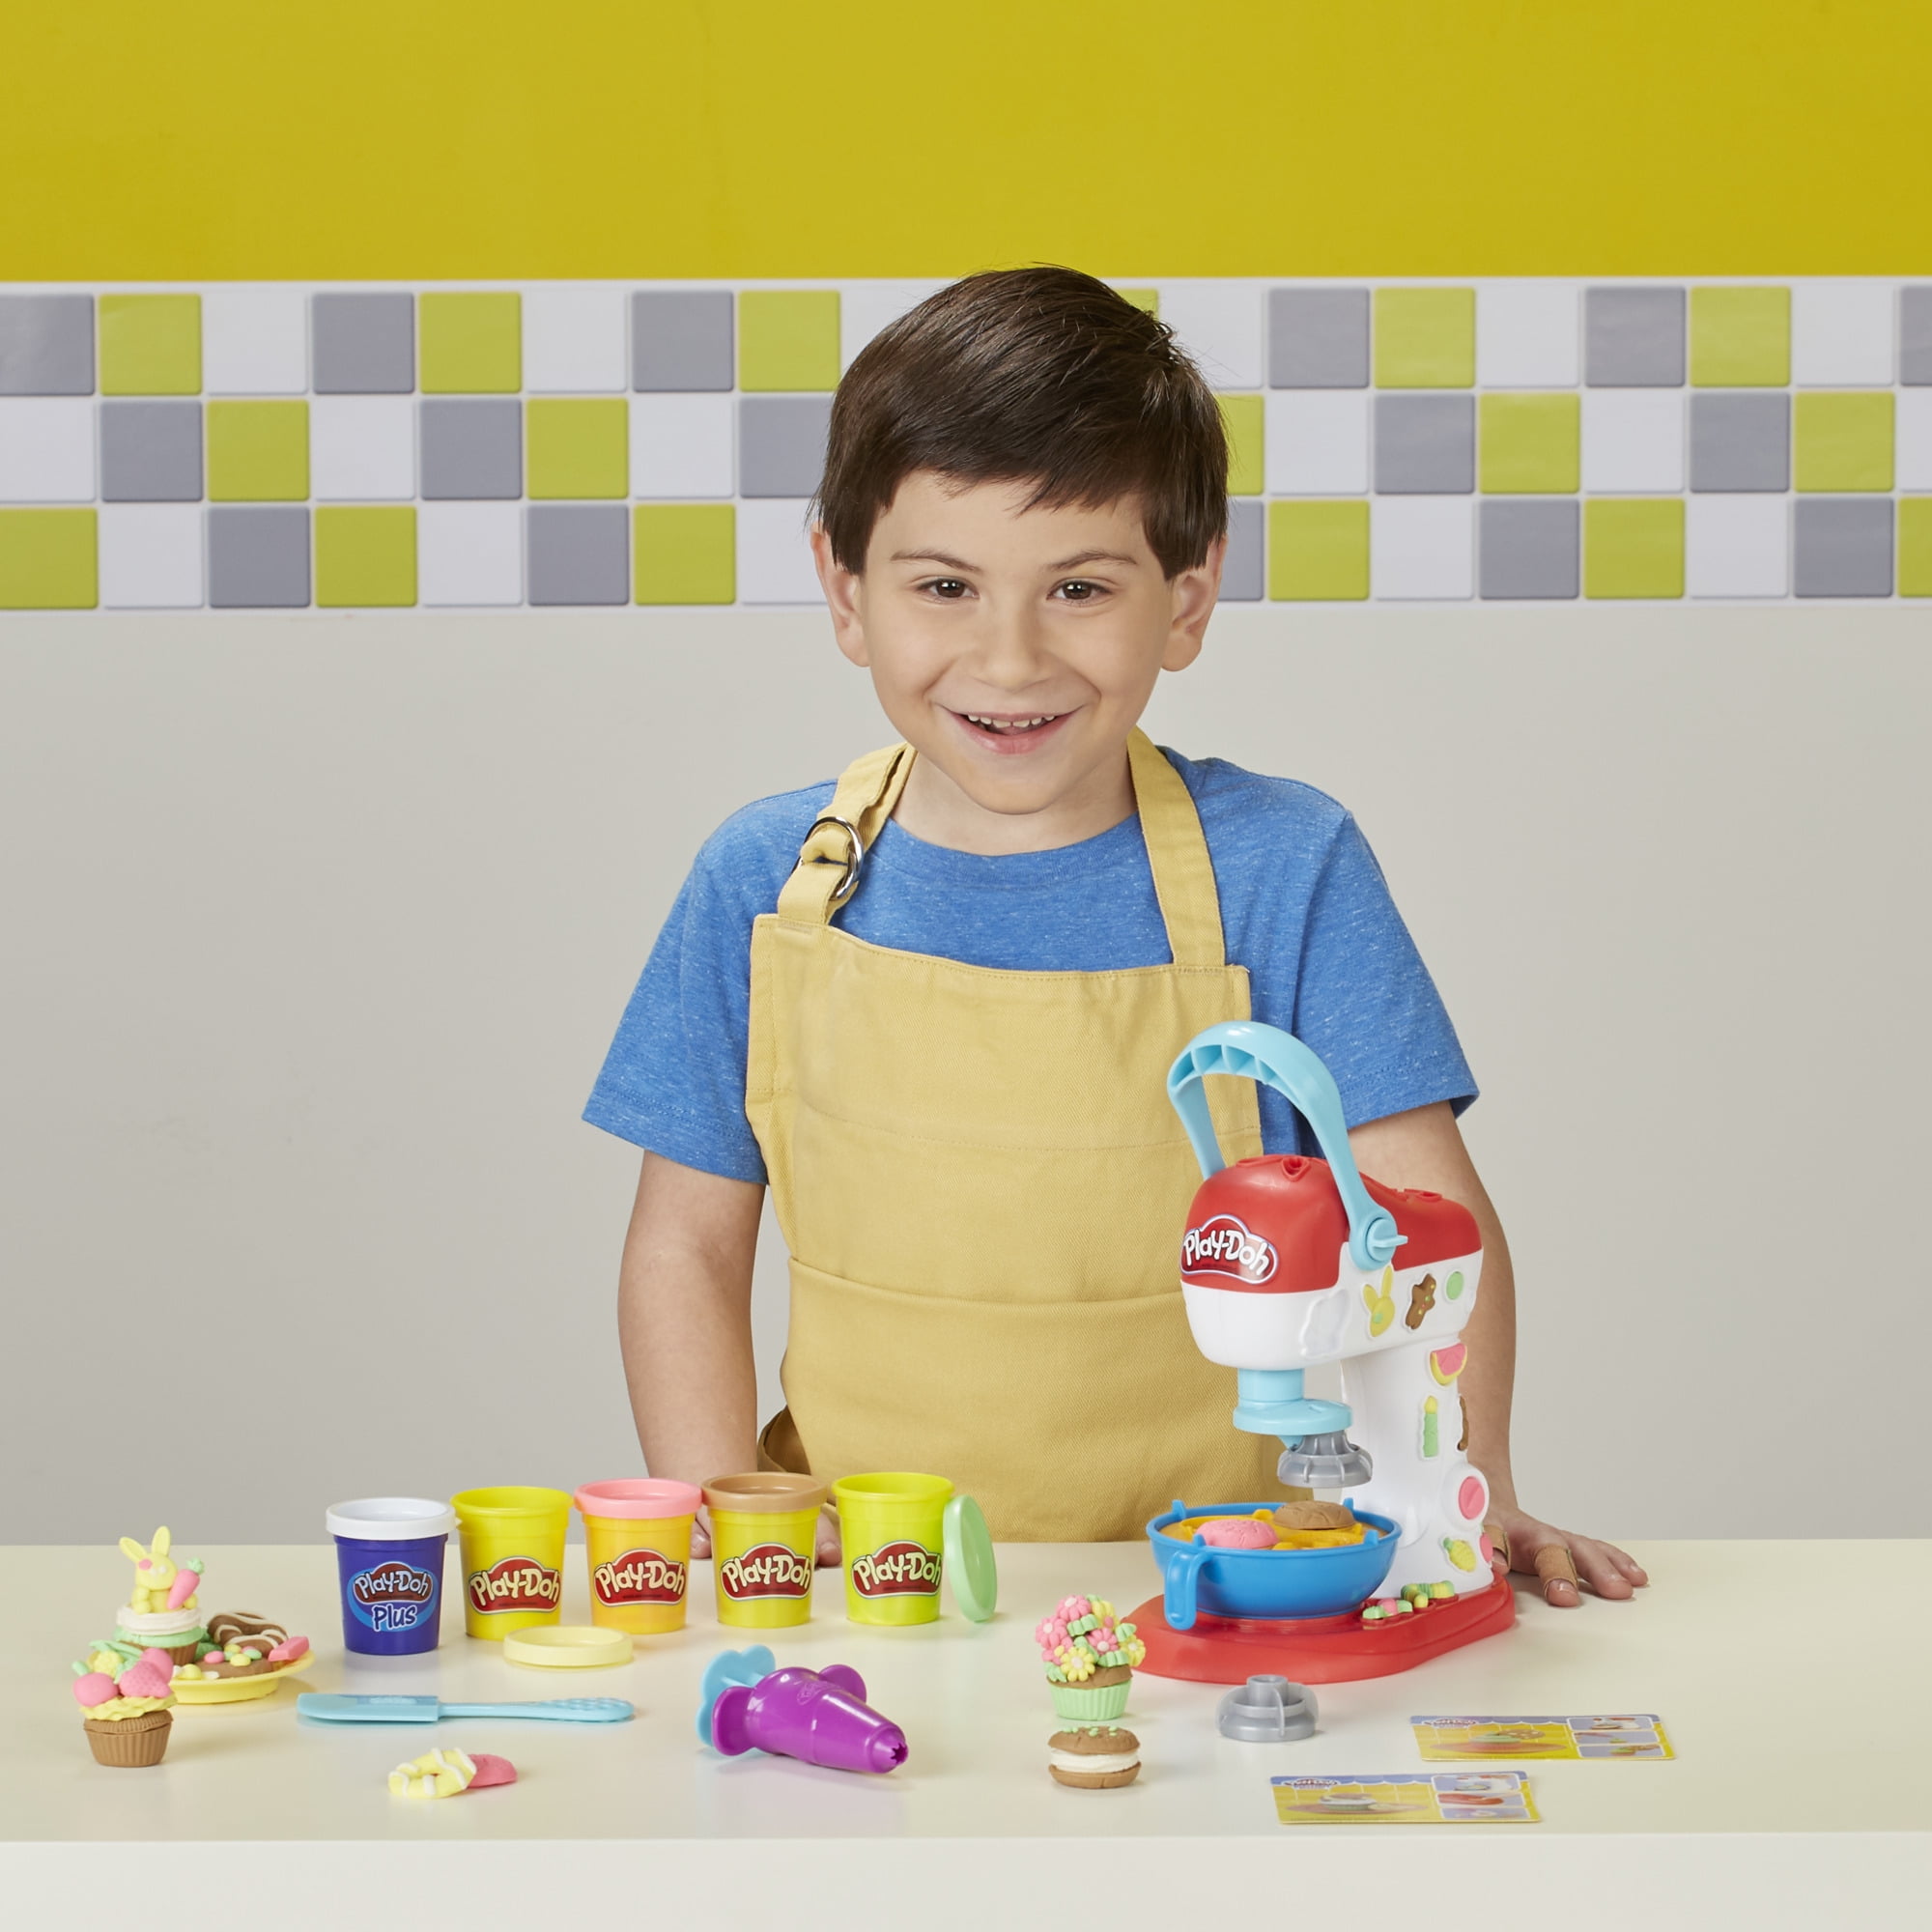 lustre Indlejre travl Play-Doh Kitchen Creations Spinning Treats Mixer Toy, Includes 6 Cans of  Compound - Walmart.com